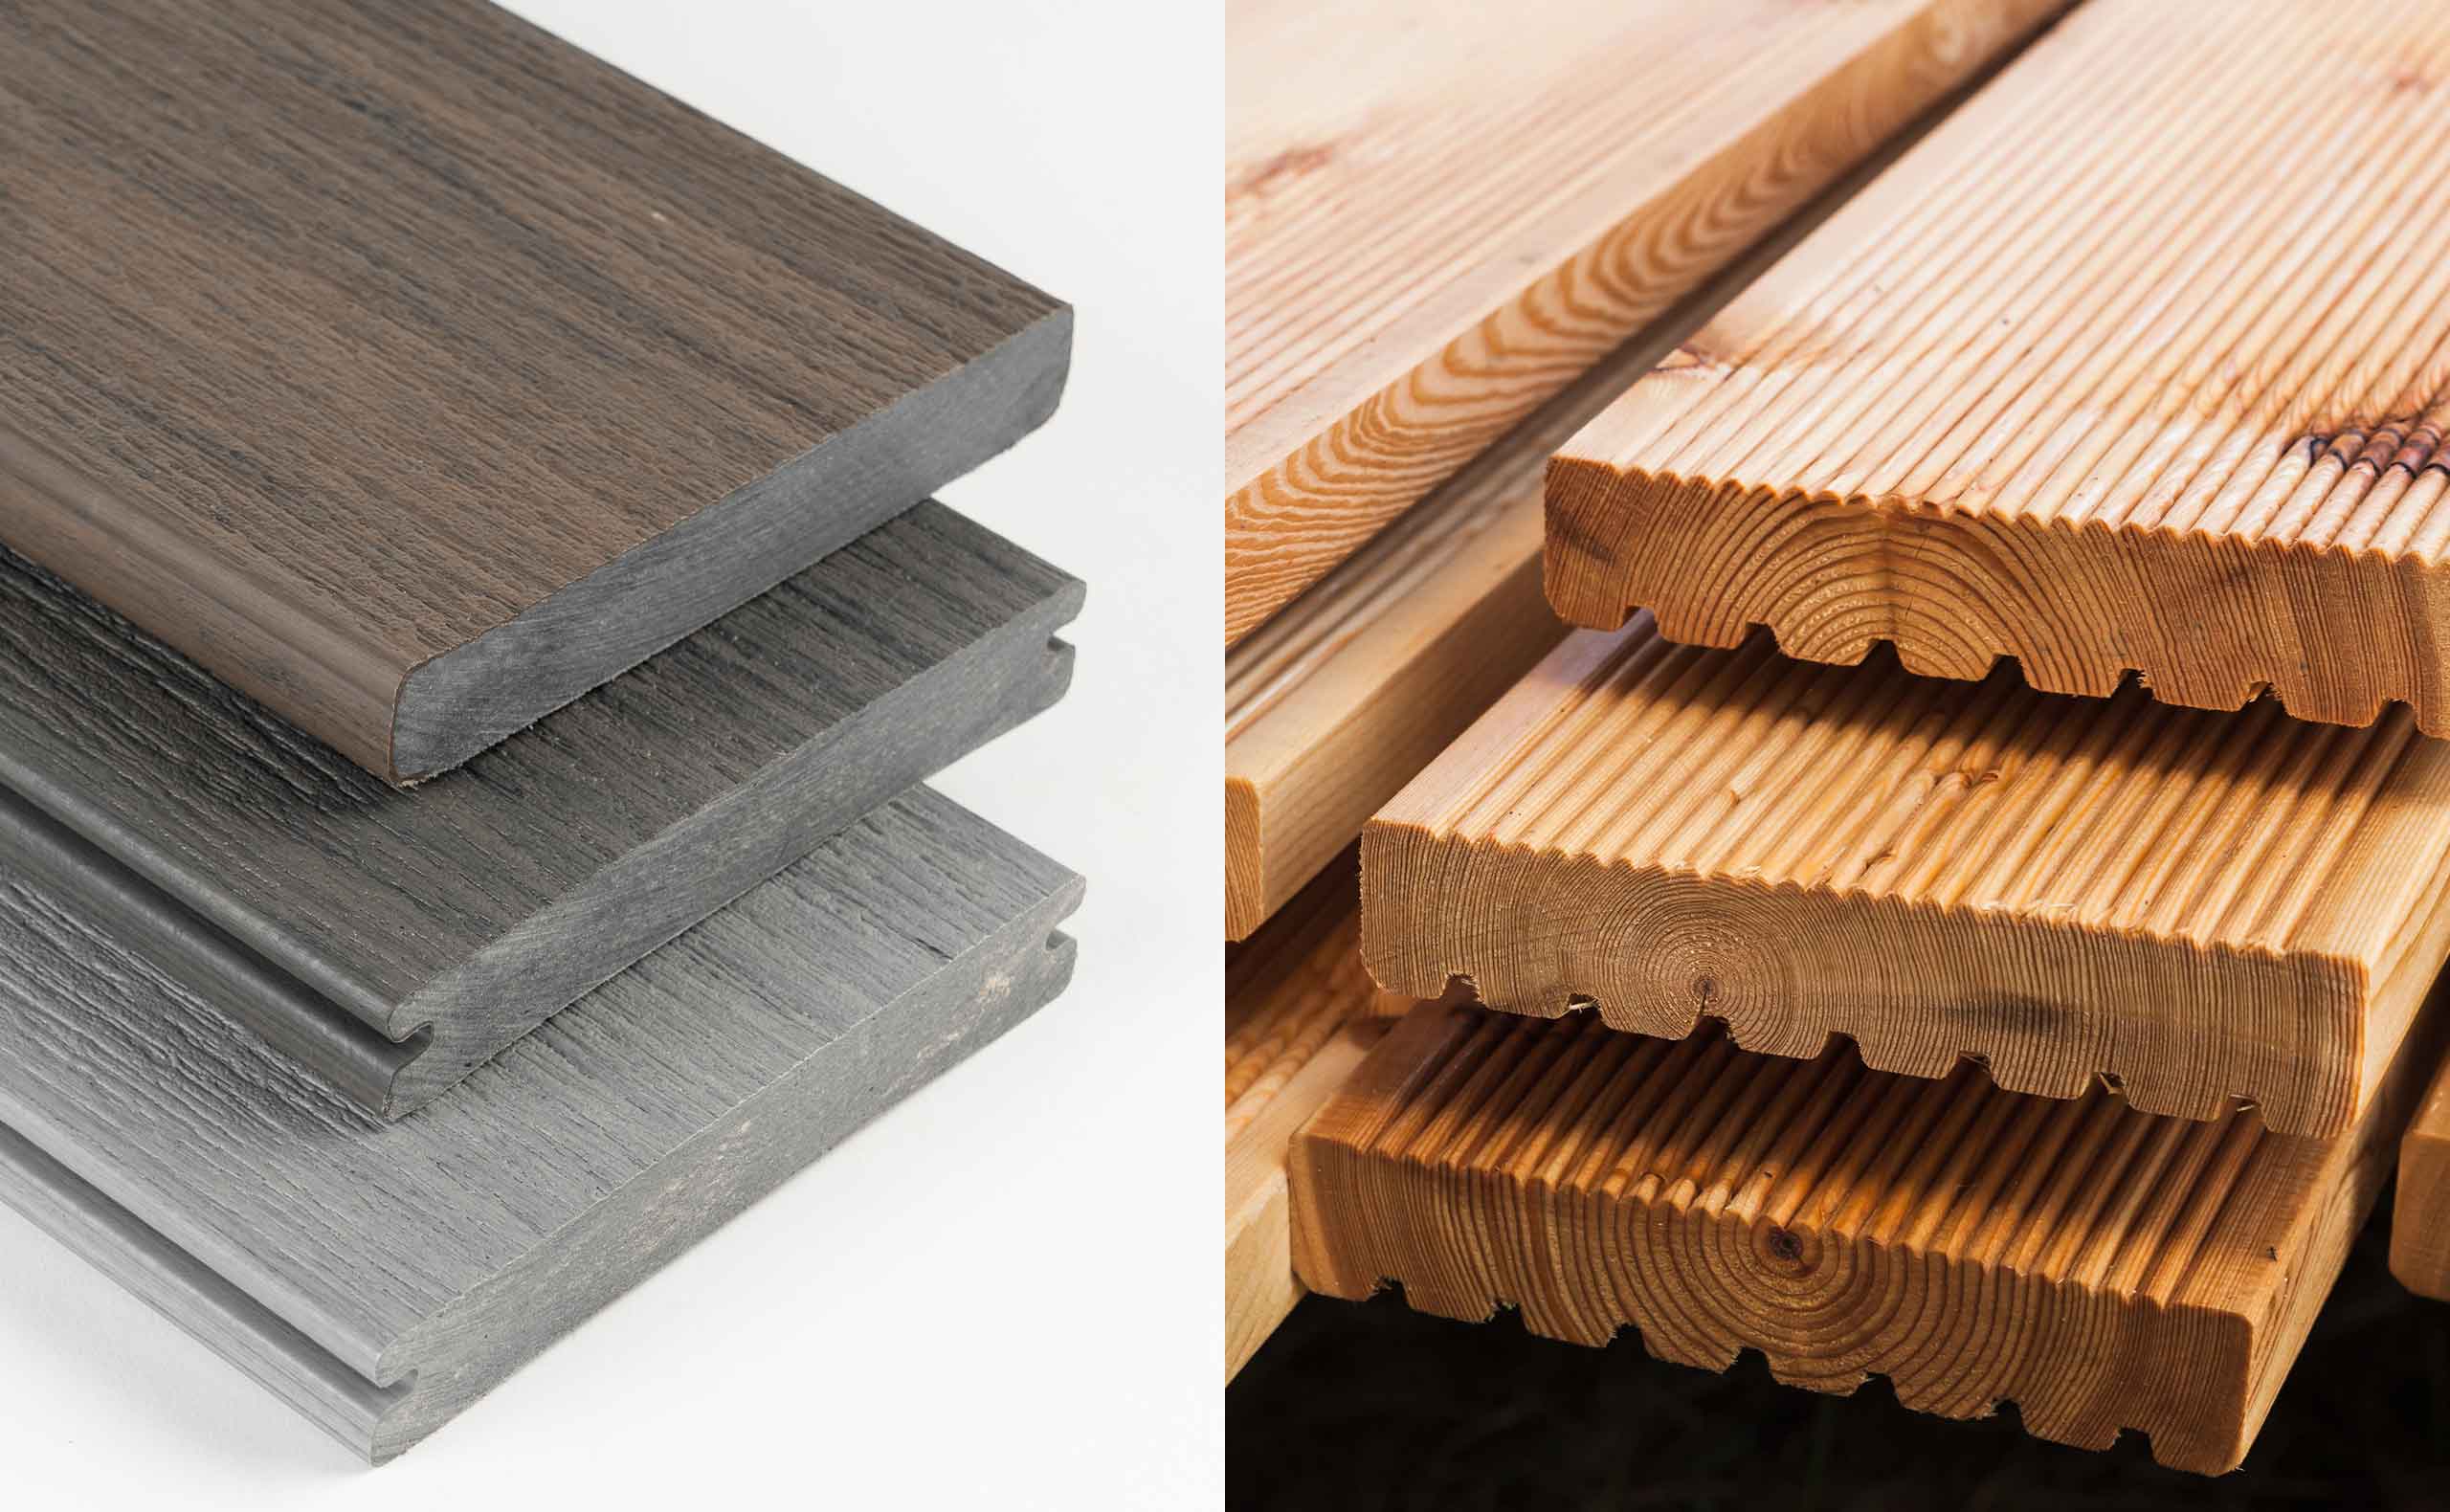 Composite Decking Vs Timber Decking: The Key Differences